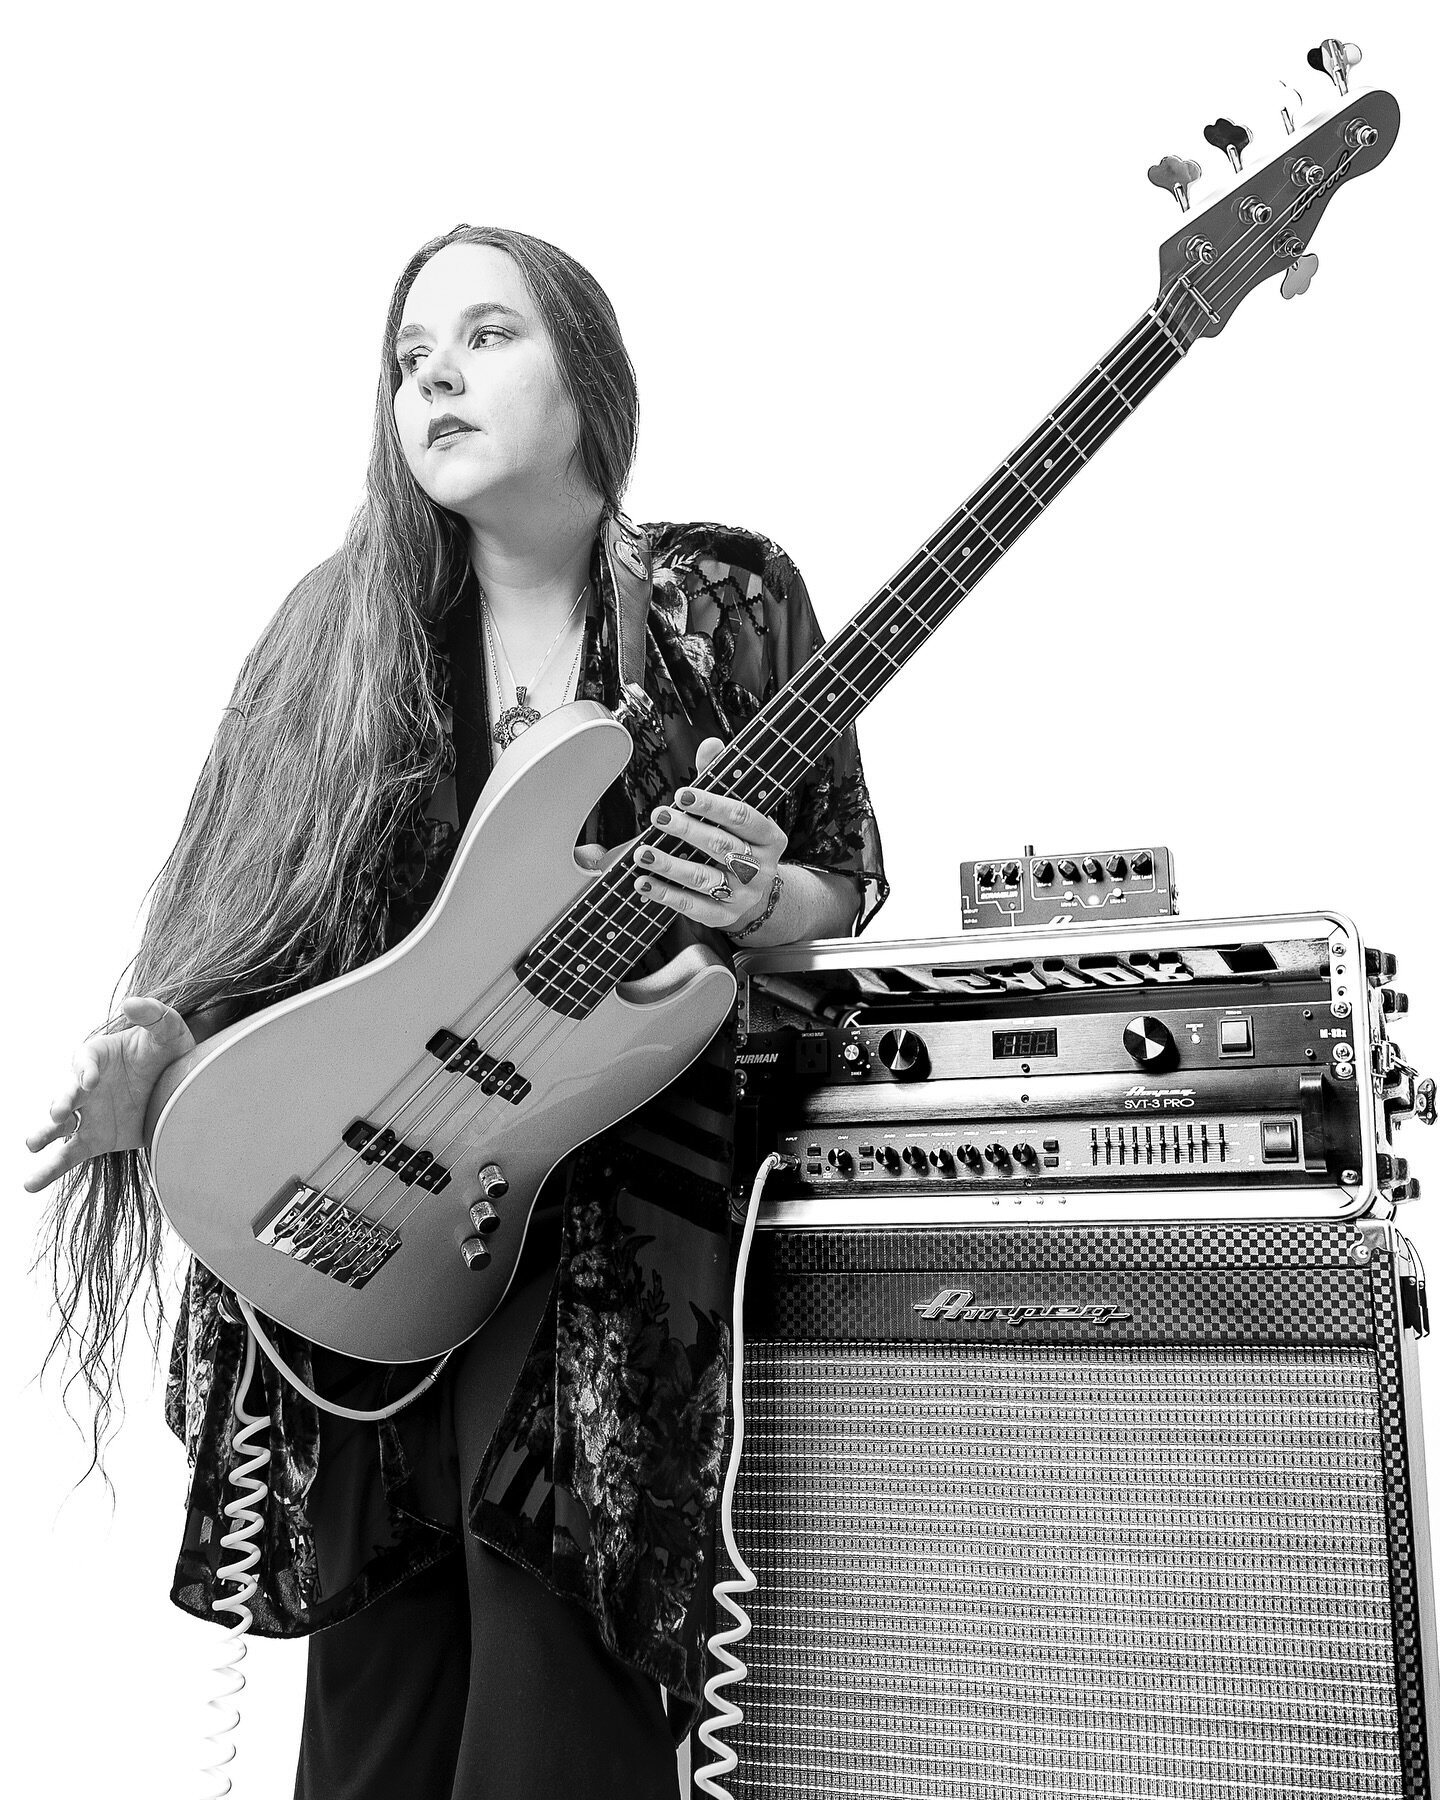 Do you remember the first time you played through a real bass rig? I do. I was in seventh grade, plugging my Silvertone bass into a vintage Ampeg B-15 Portaflex (I wish I knew the exact year). It was sitting at the very back of our choir room closet.